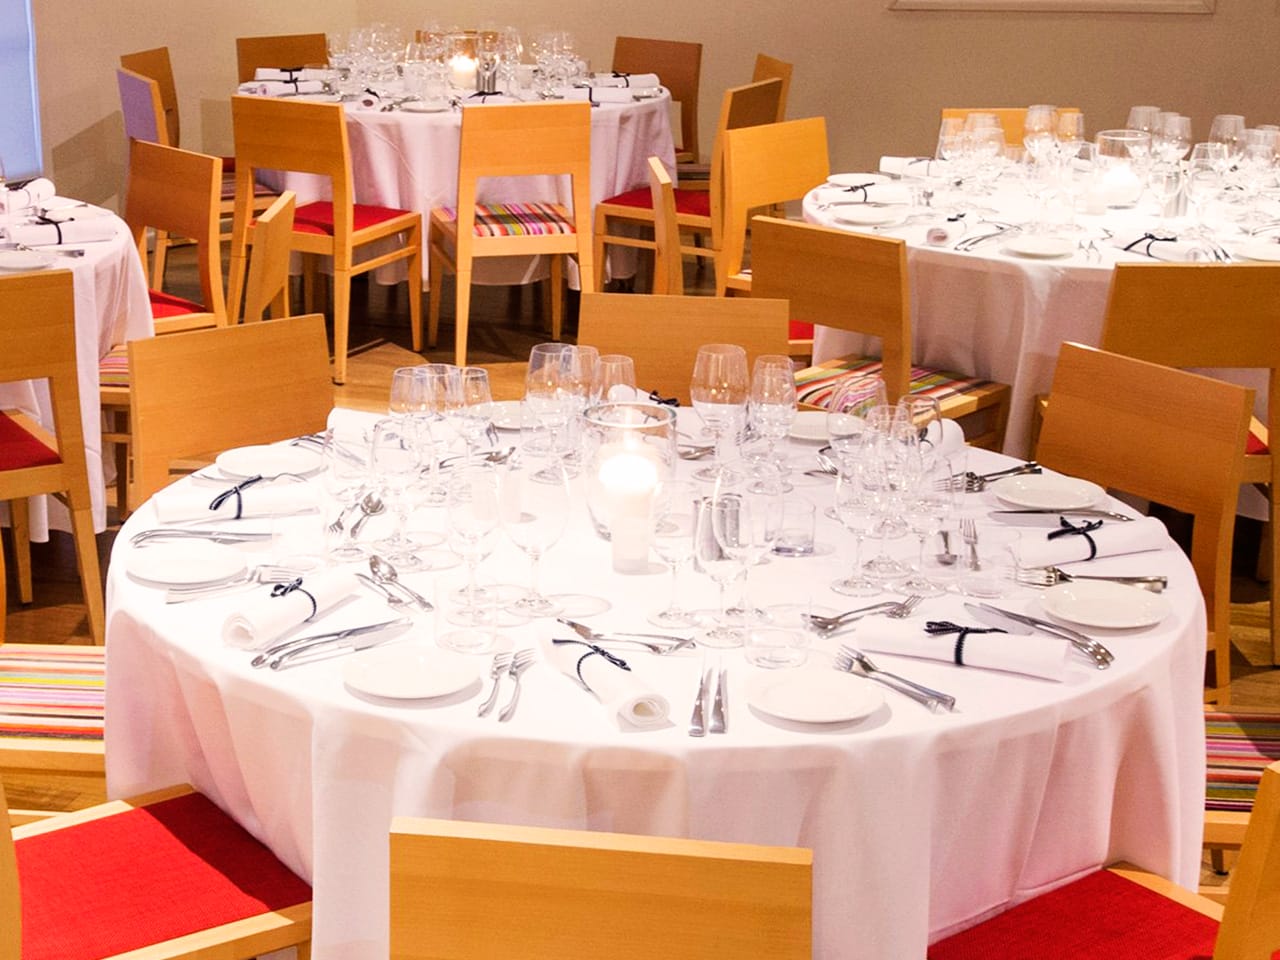 Tables And Chairs In Banquet Style Inside The Function Room